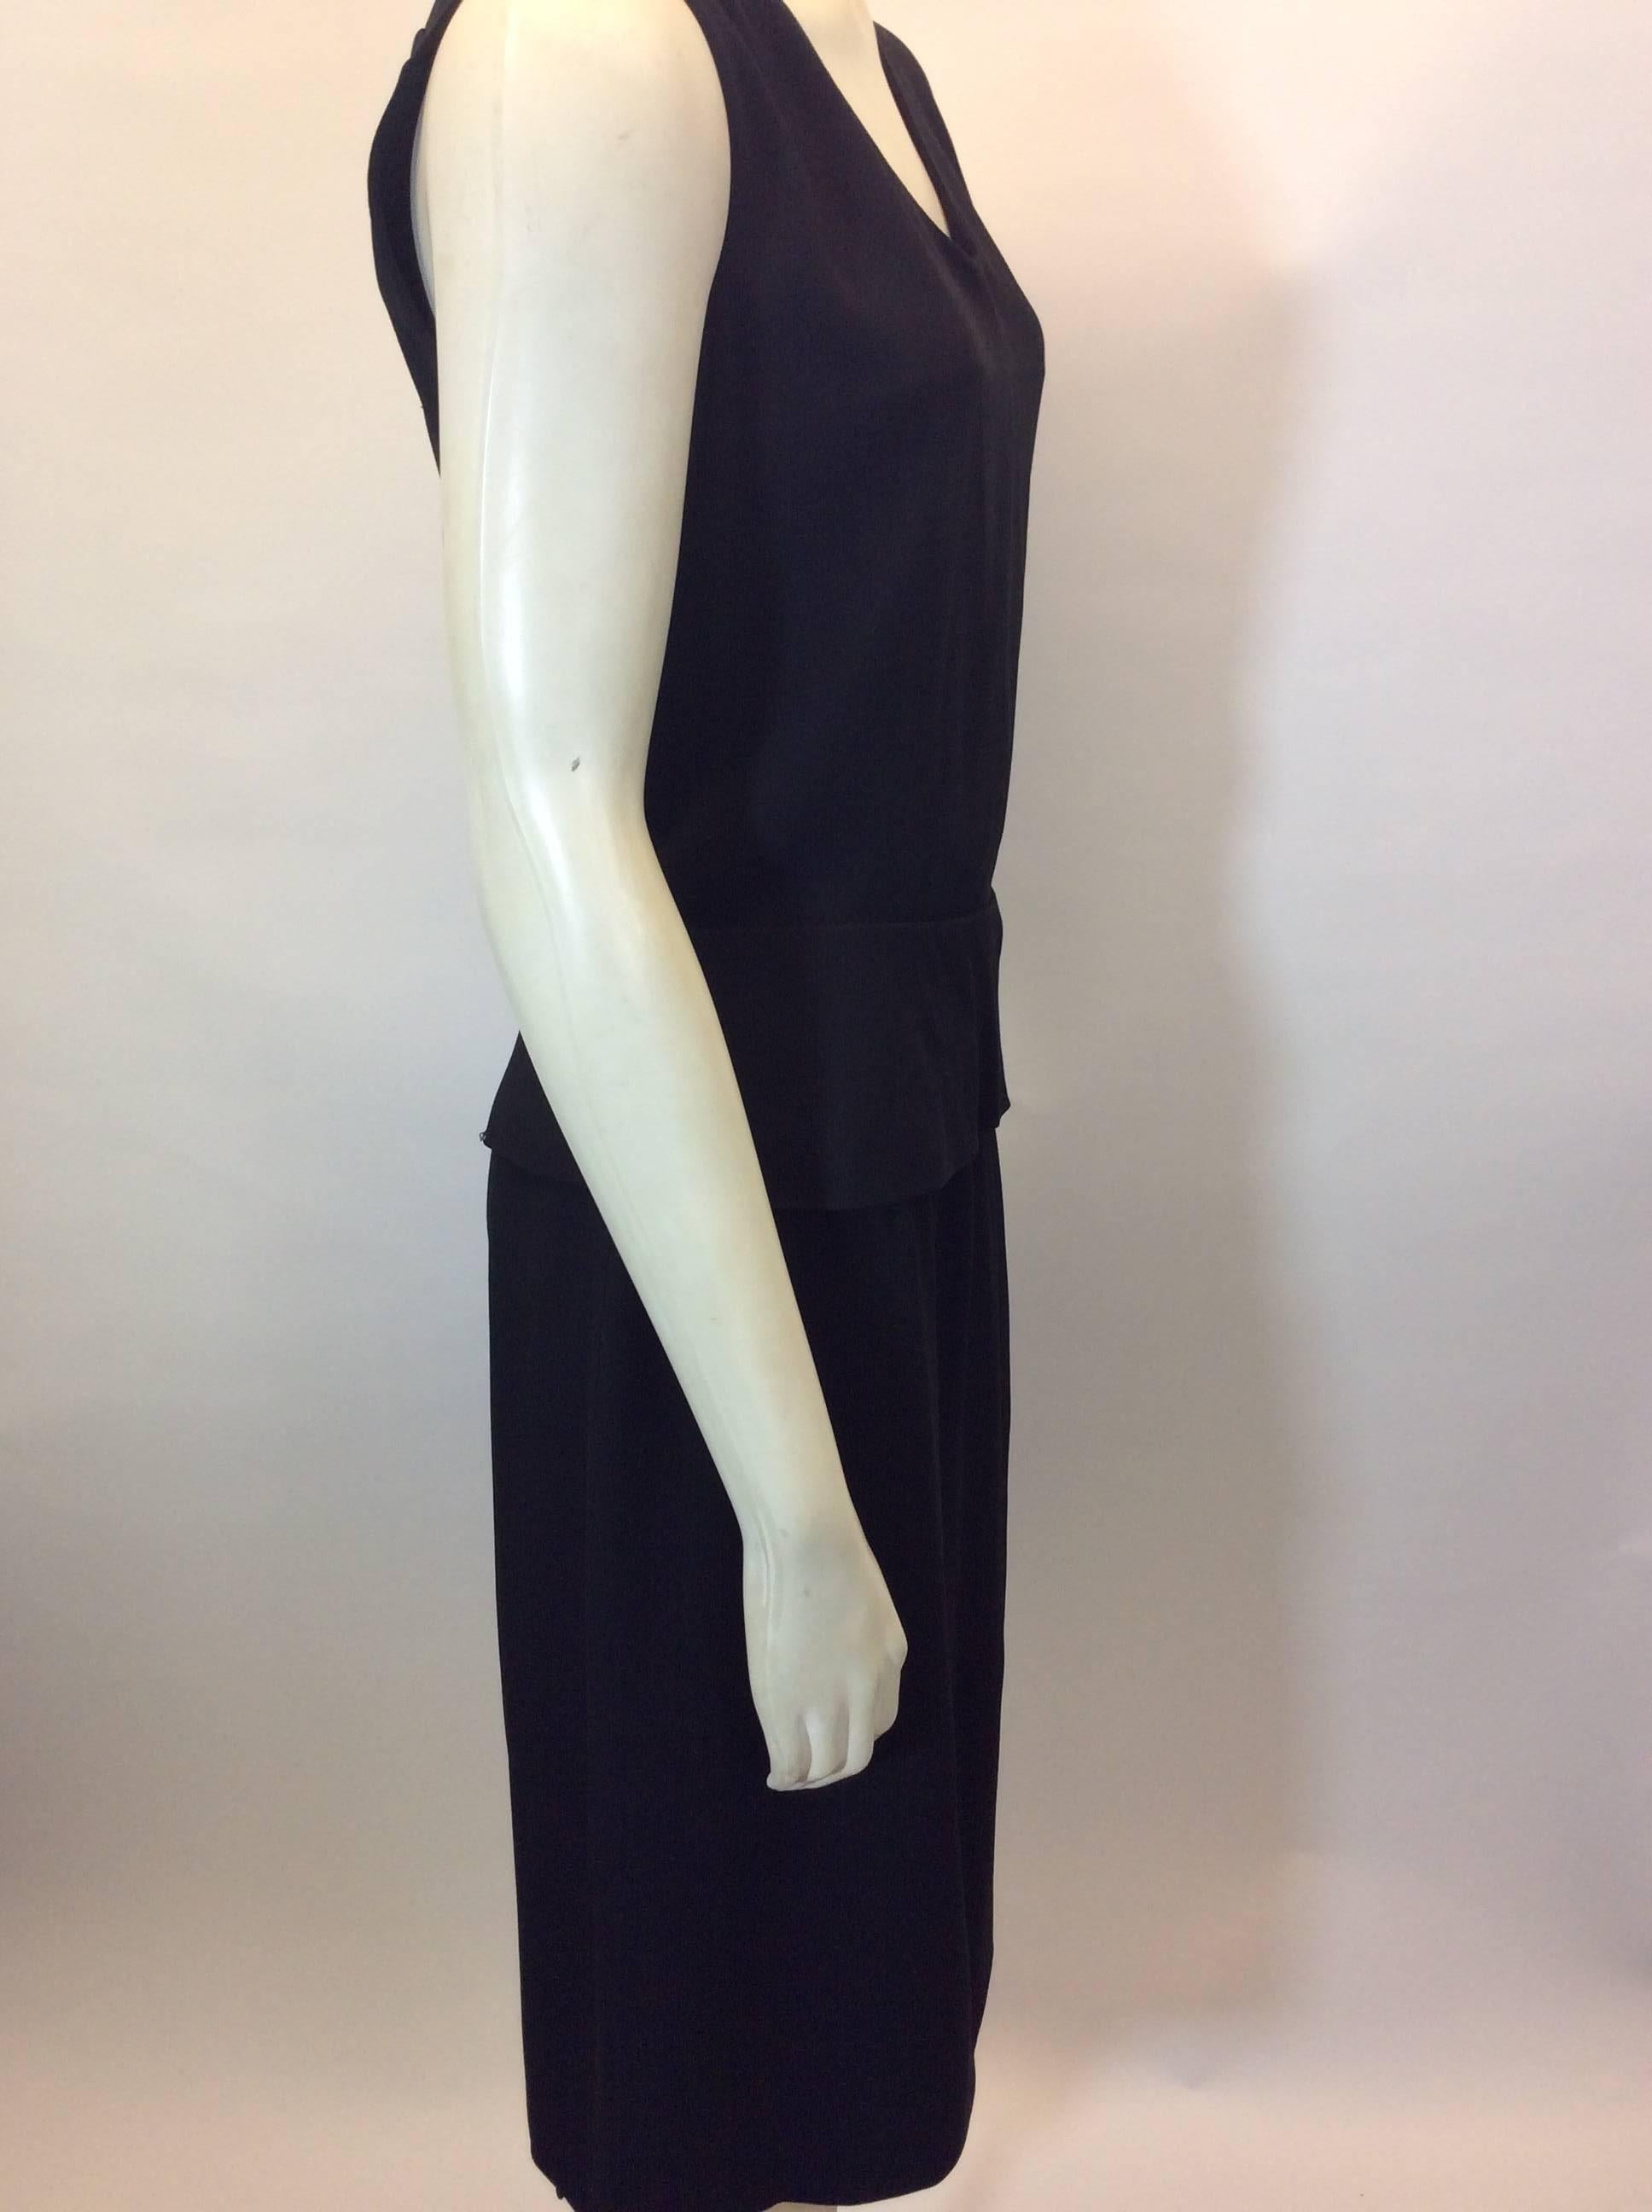 Chloe Black V-Neck Dress with Peplum Detail In Excellent Condition For Sale In Narberth, PA